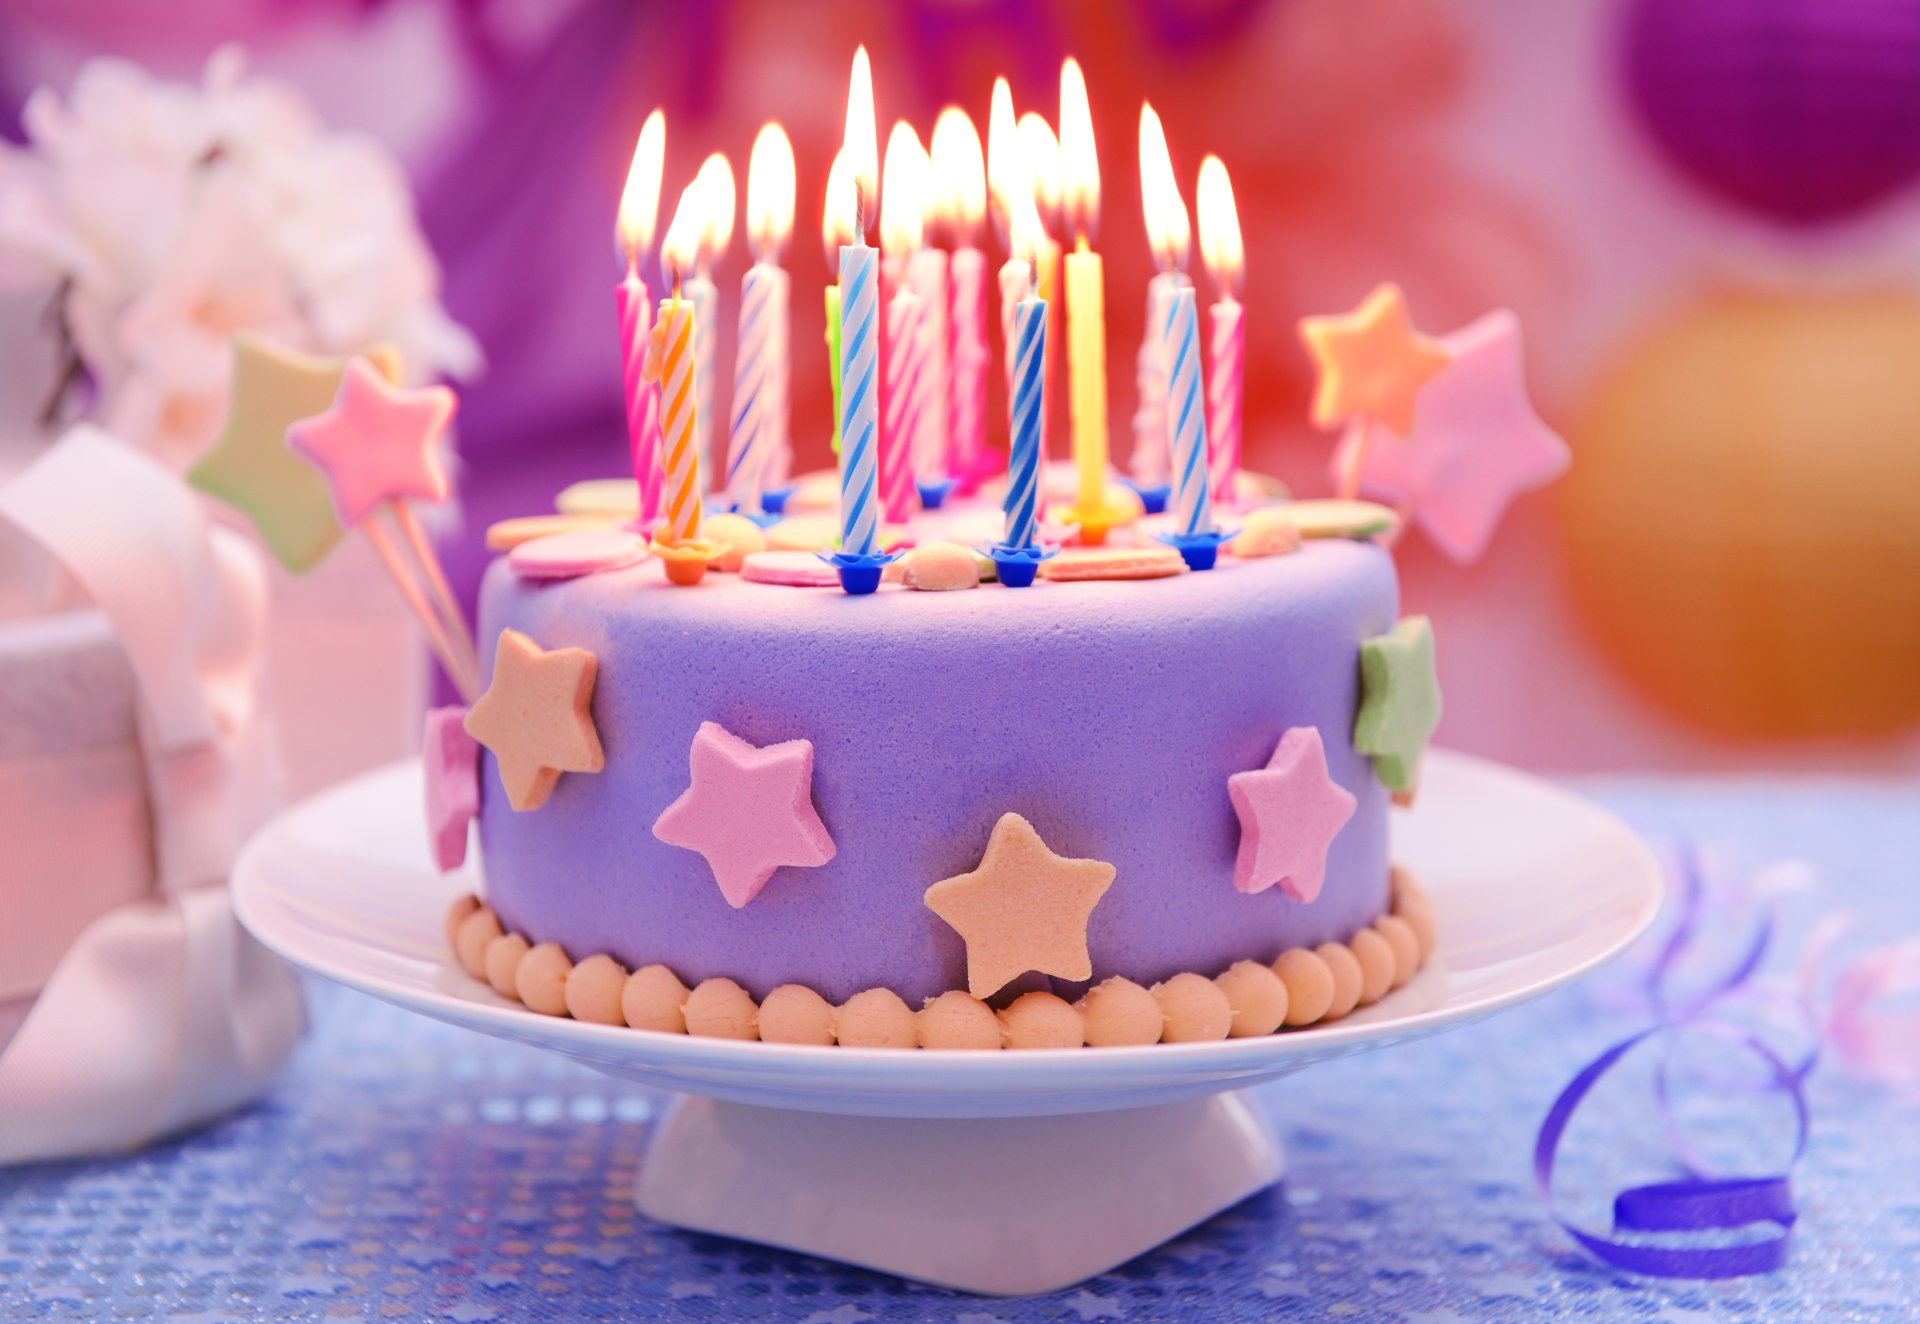 birthday cake 1080P 2k 4k Full HD Wallpapers Backgrounds Free Download   Wallpaper Crafter